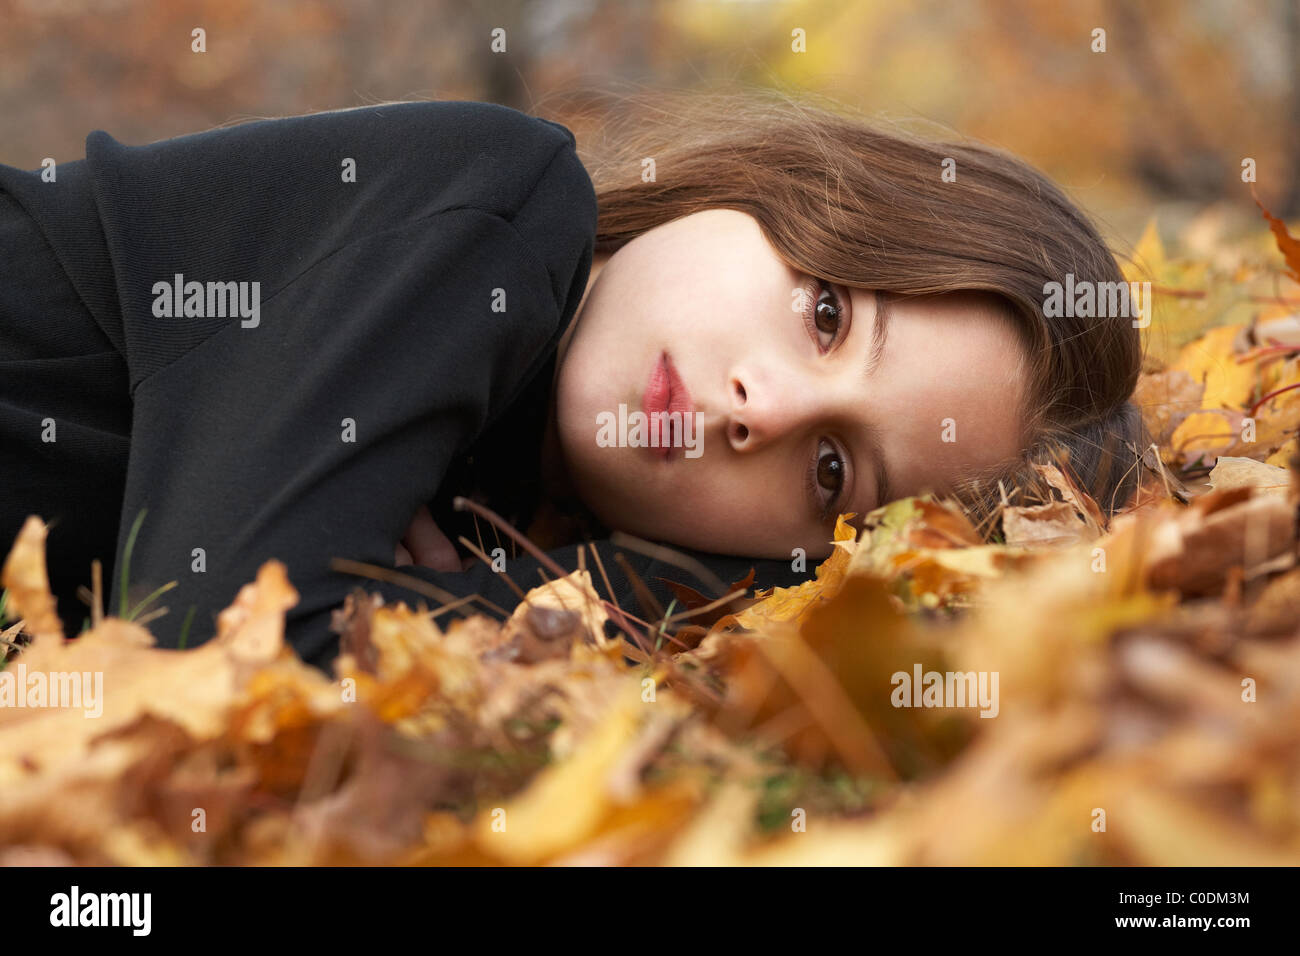 Child laying in fallen leaves Stock Photo